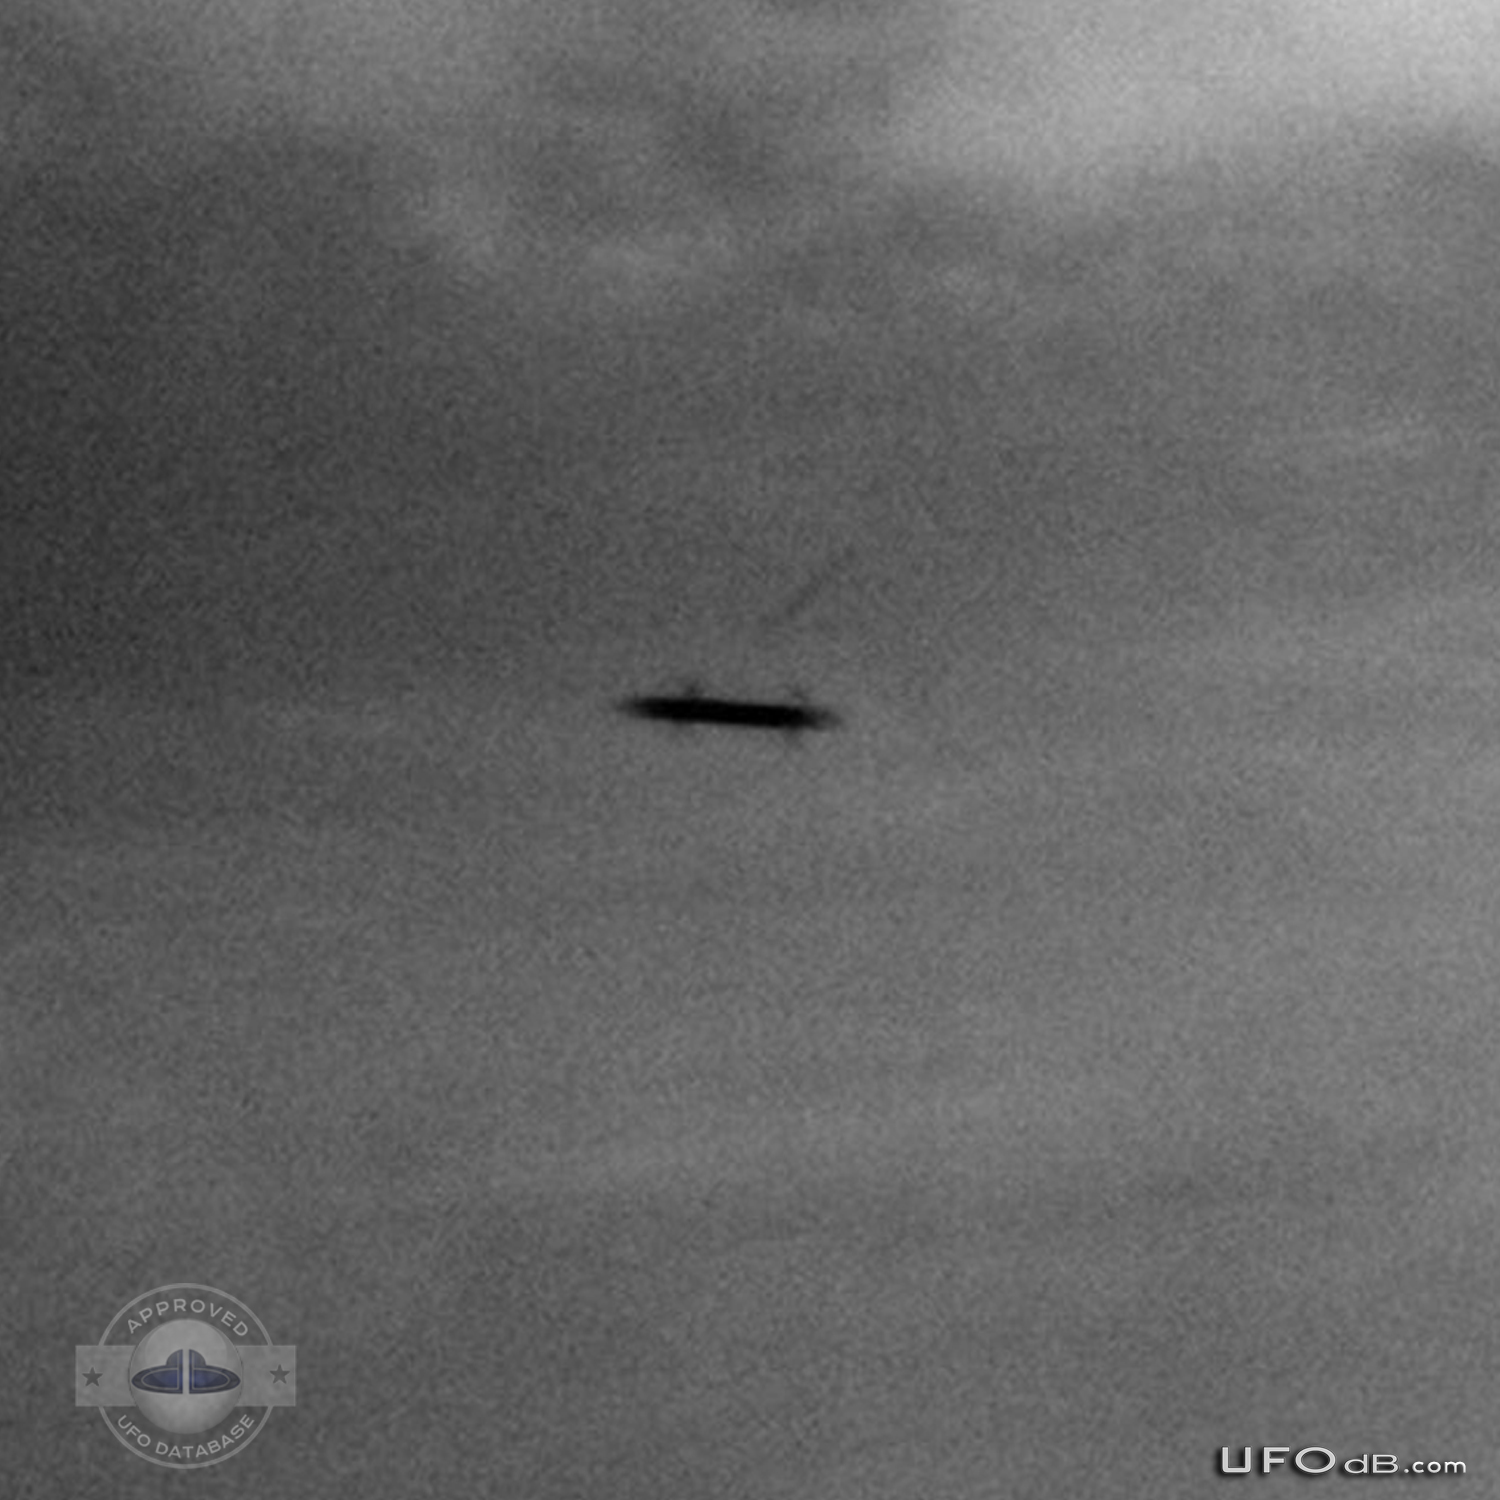 Dark Winged Saucer UFO over the town of Havant, England | April 7 2011 UFO Picture #263-3